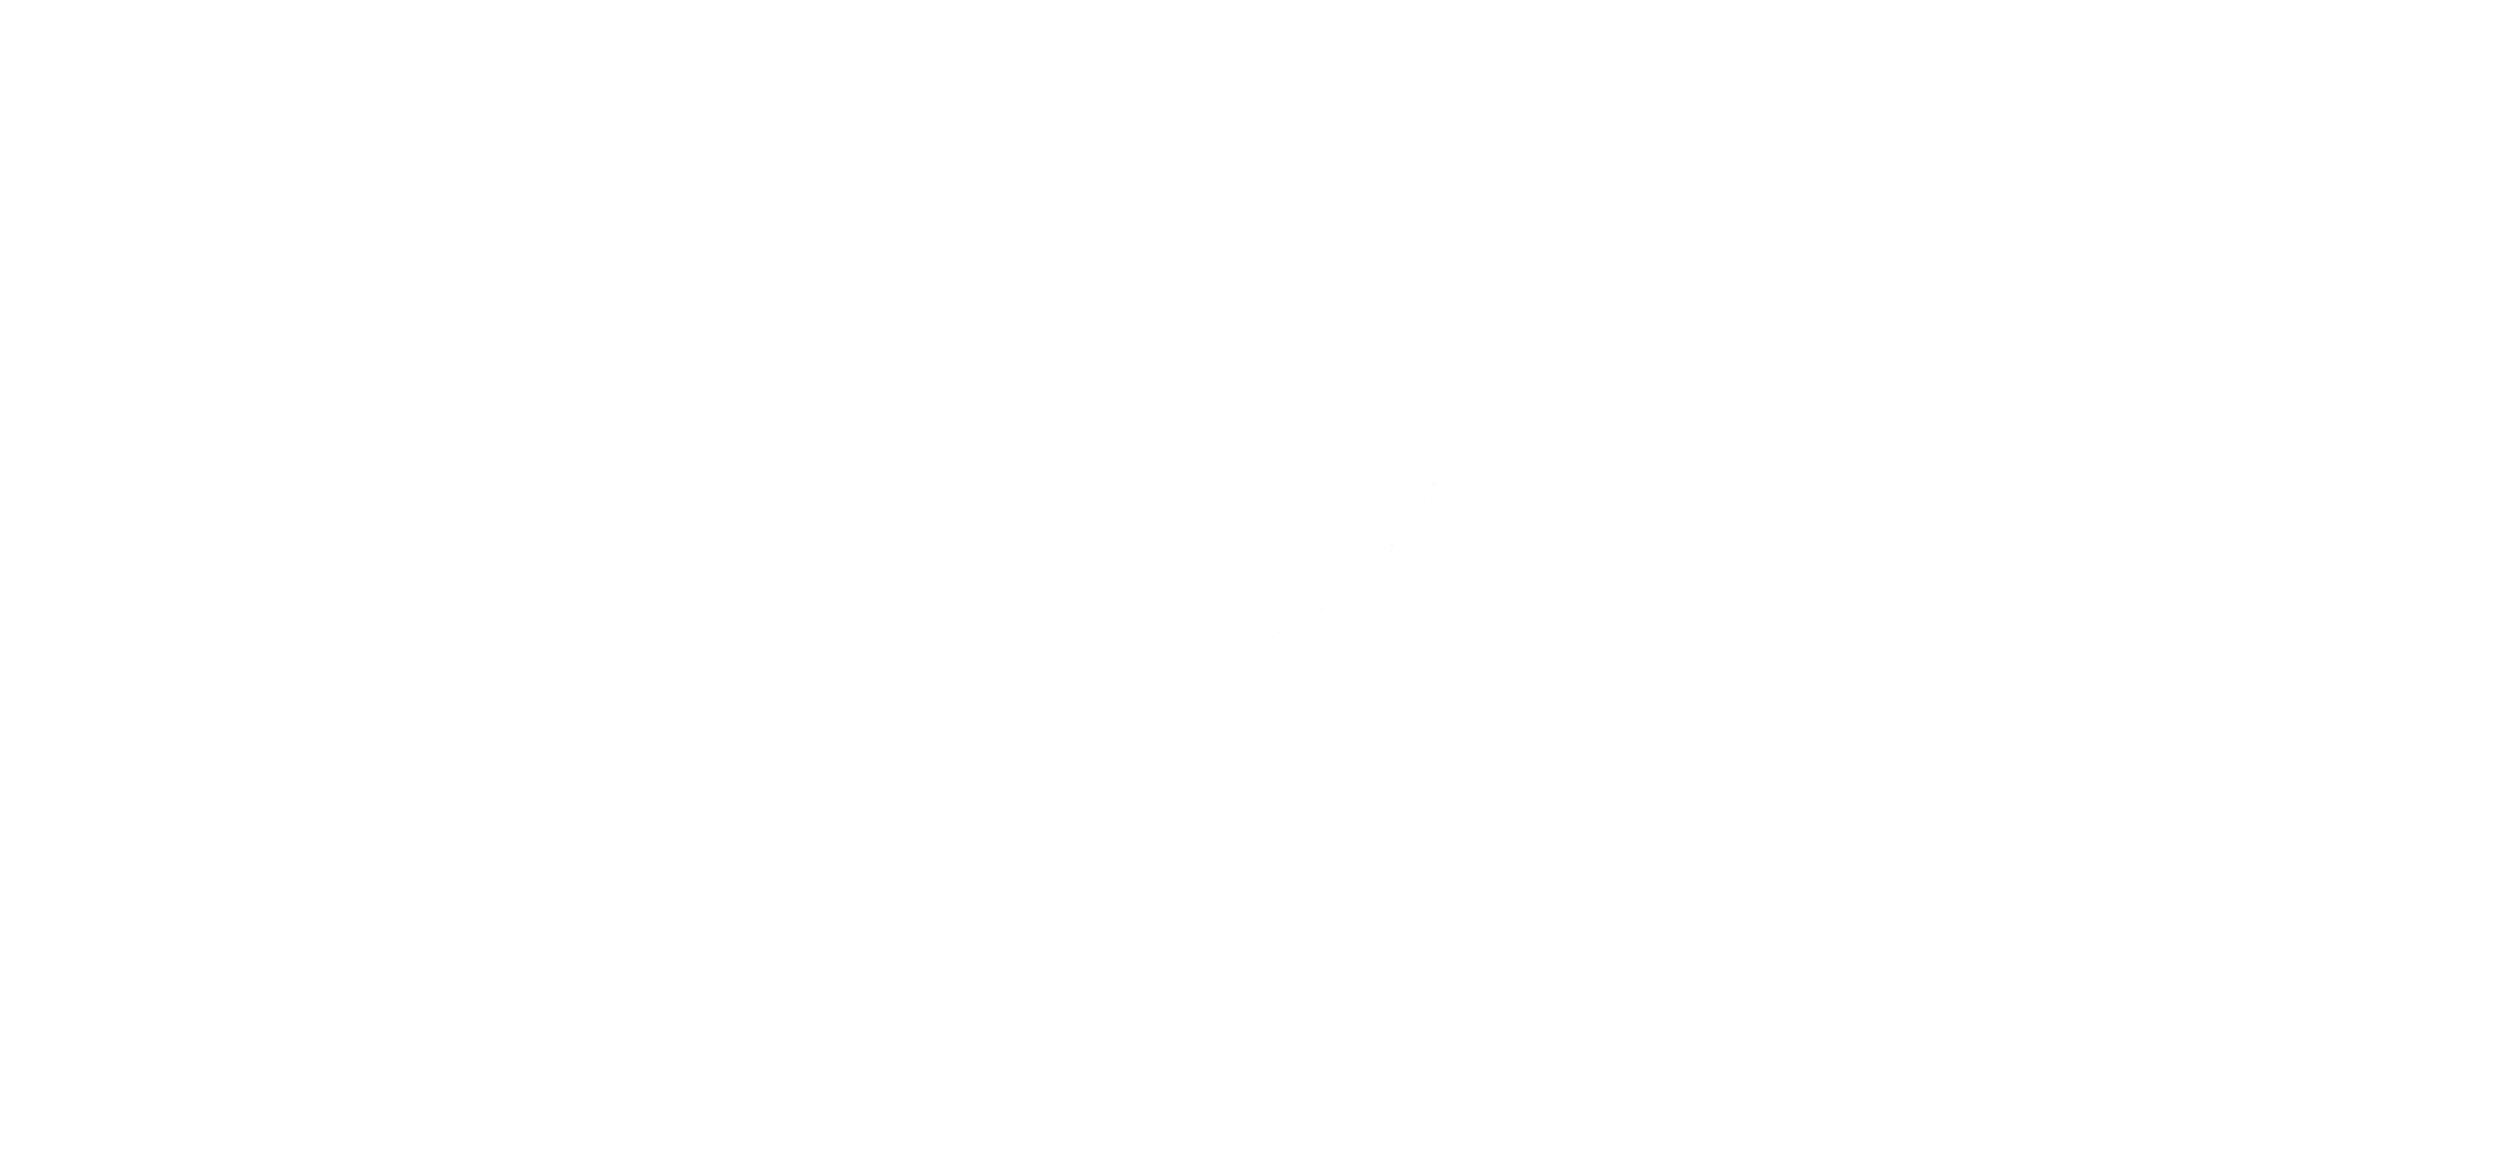 Atlas Legal Services Primary Logo FInal-01.png